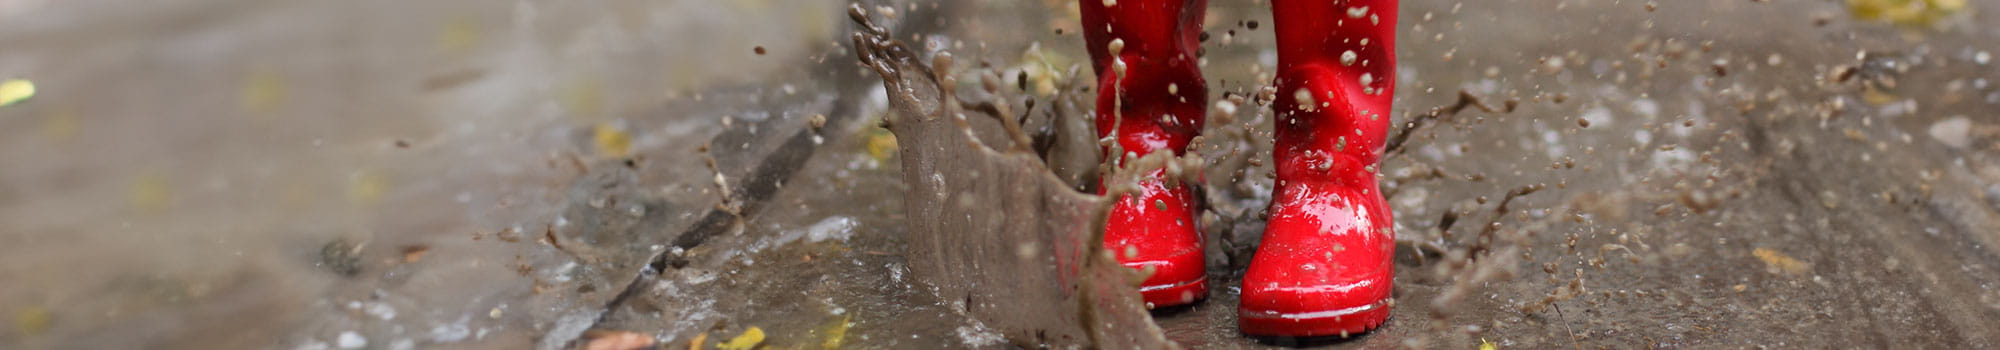 Child wearing red rain boots jumping into a puddle. Close up